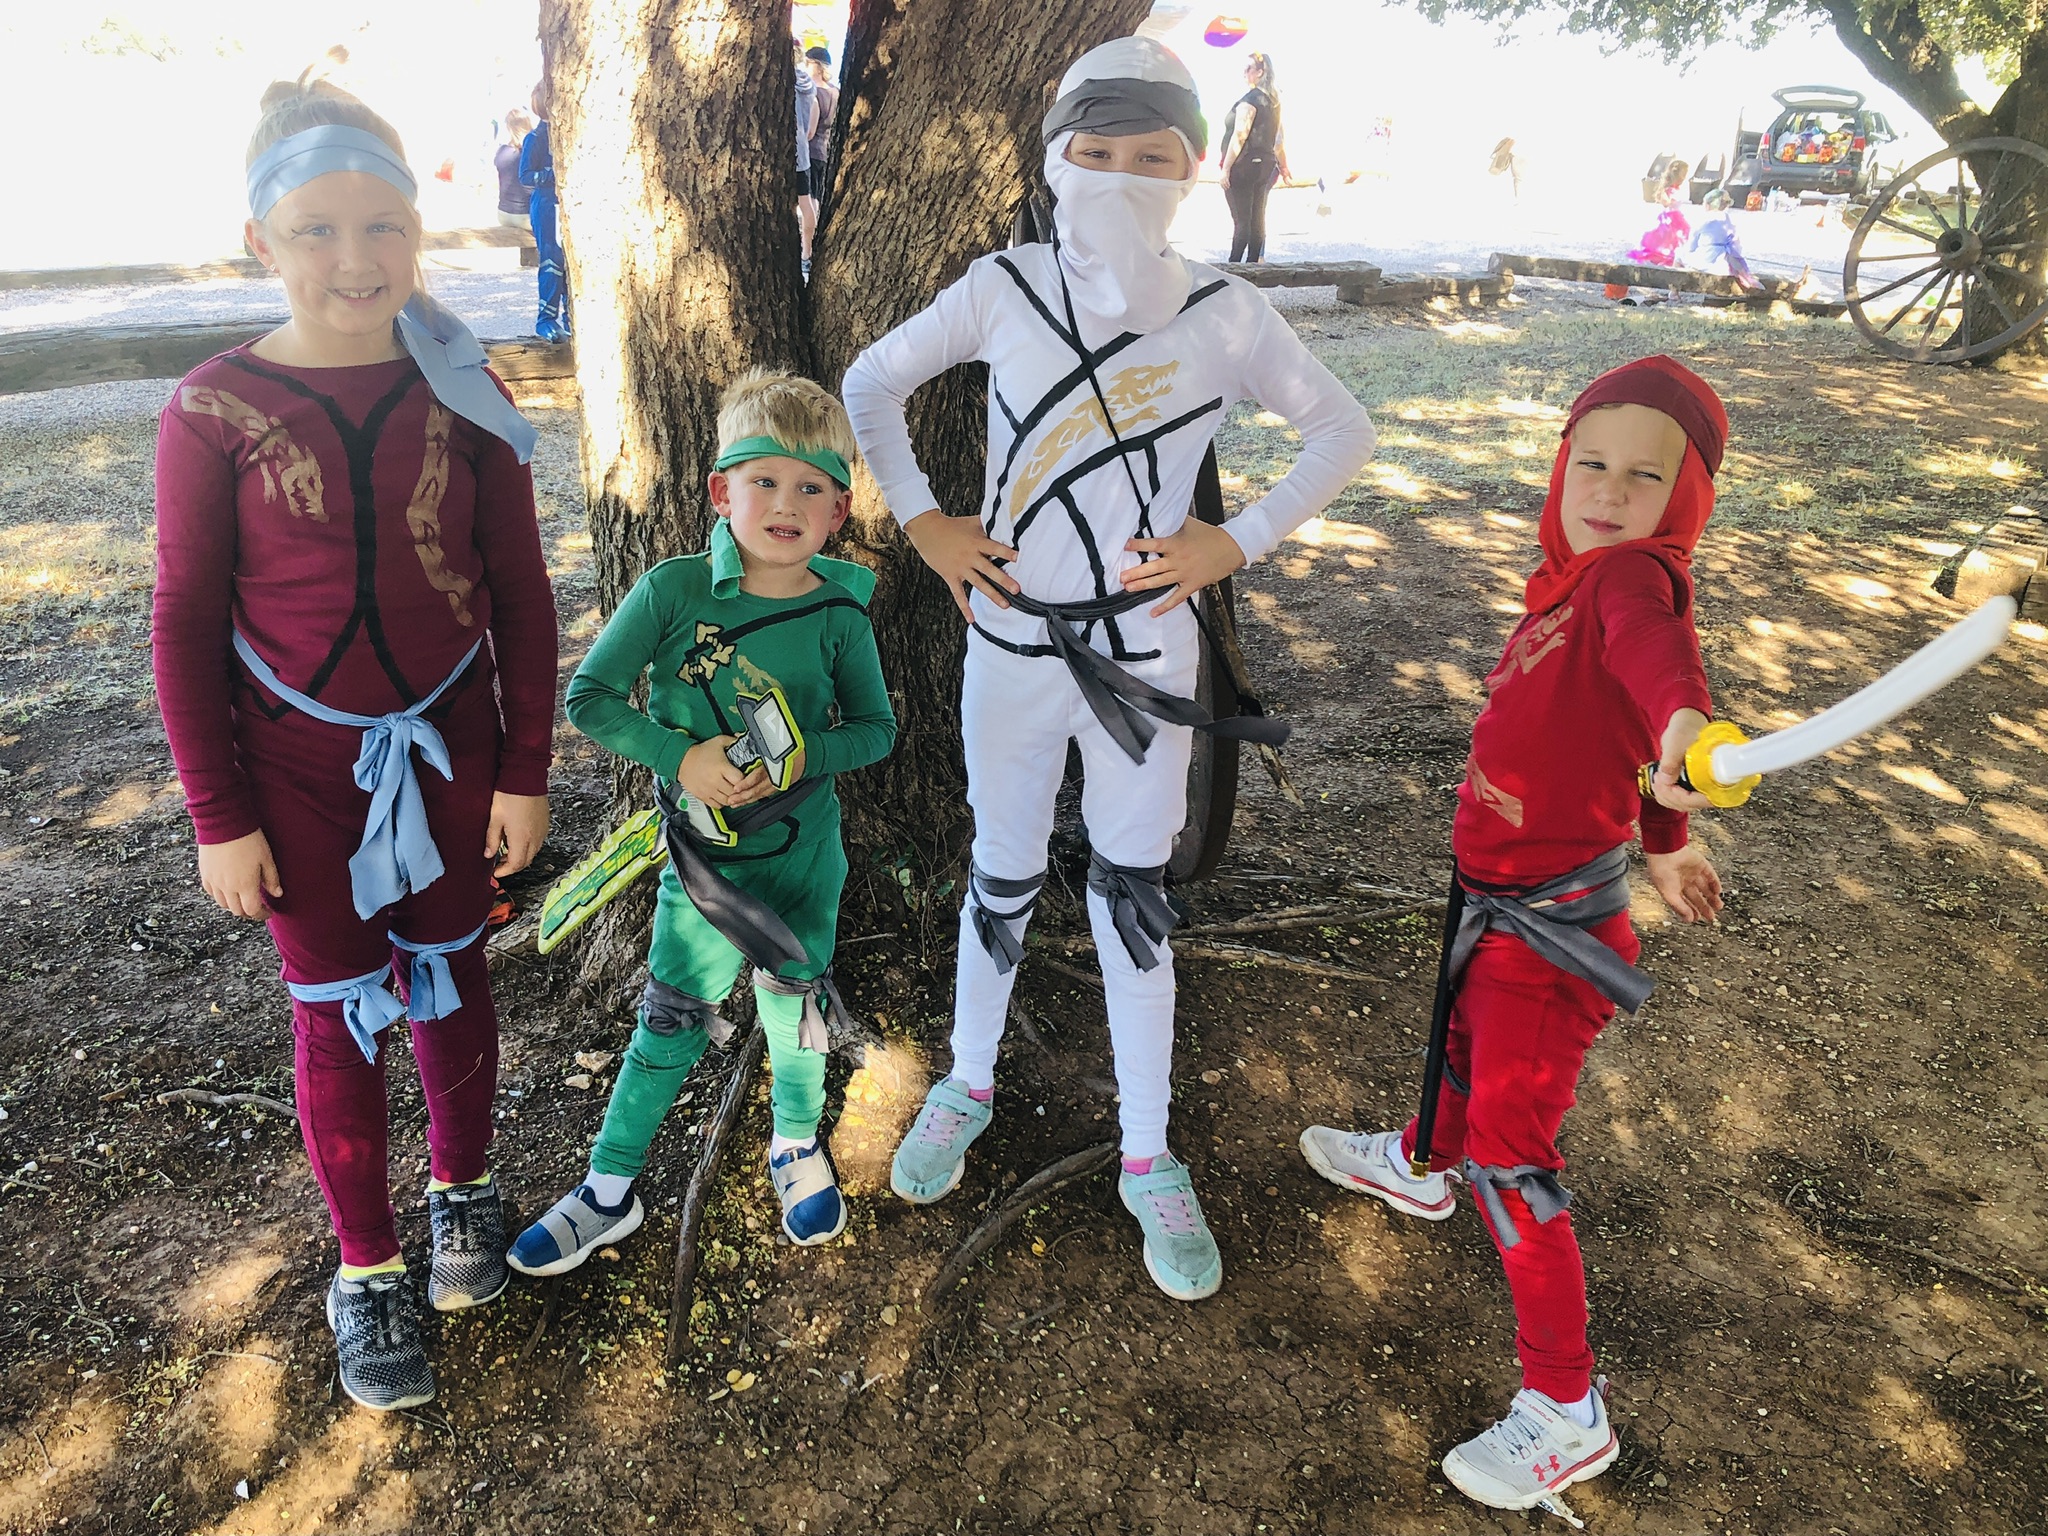 http://www.coolest-homemade-costumes.com/files/2021/10/when-all-4-siblings-get-on-board-you-make-the-group-halloween-costume-idea-happen-220476.jpeg?v=1635272038